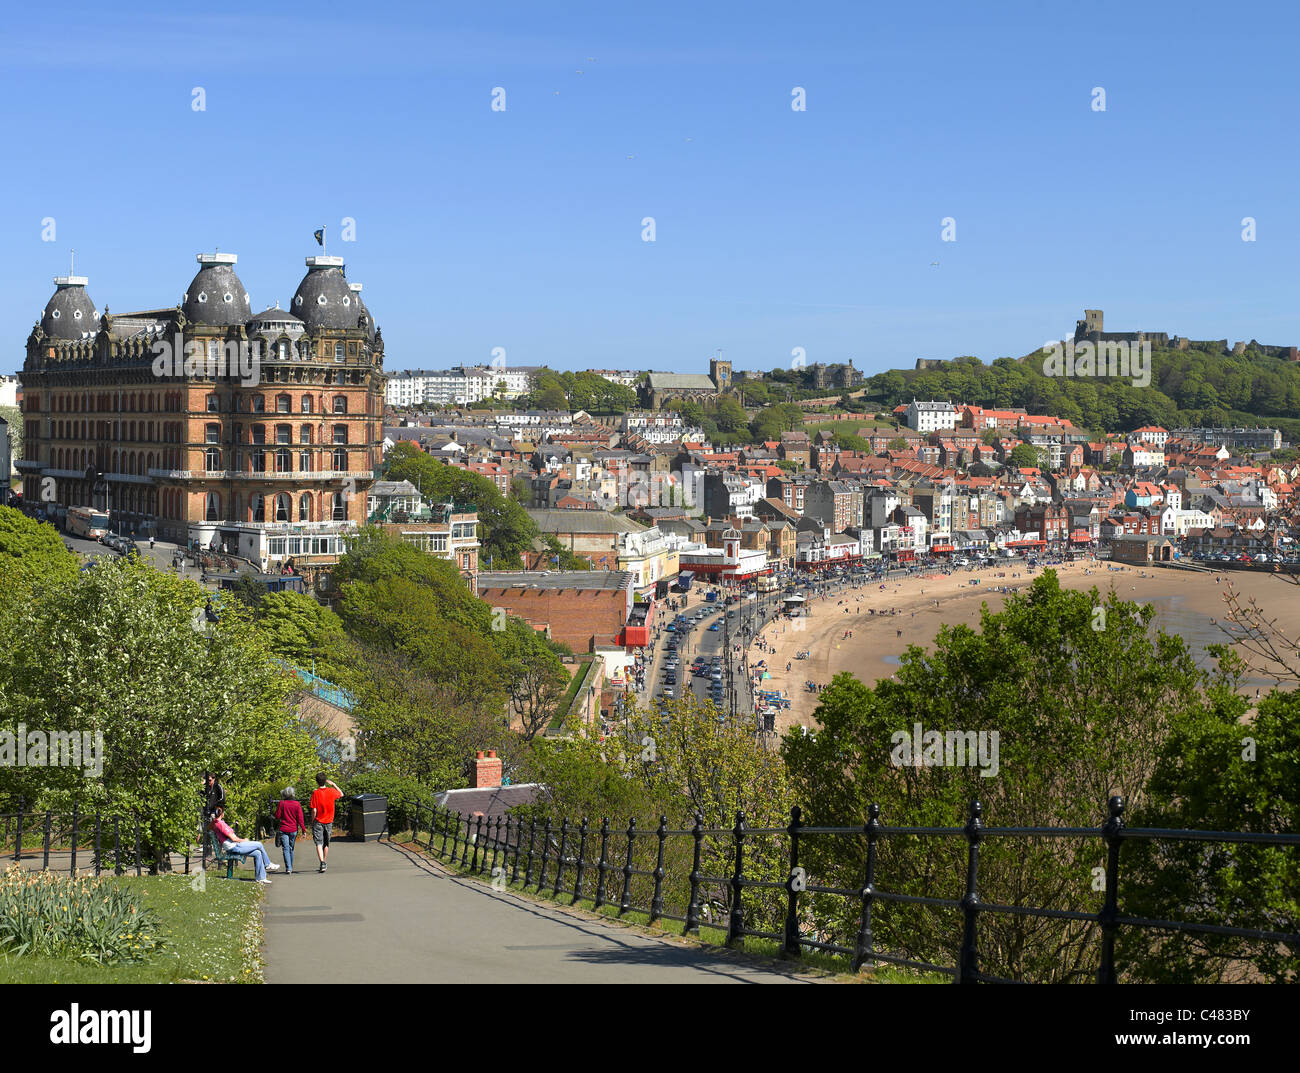 The Grand Hotel overlooking South Bay beach  in summer Scarborough North Yorkshire England UK United Kingdom GB Great Britain Stock Photo